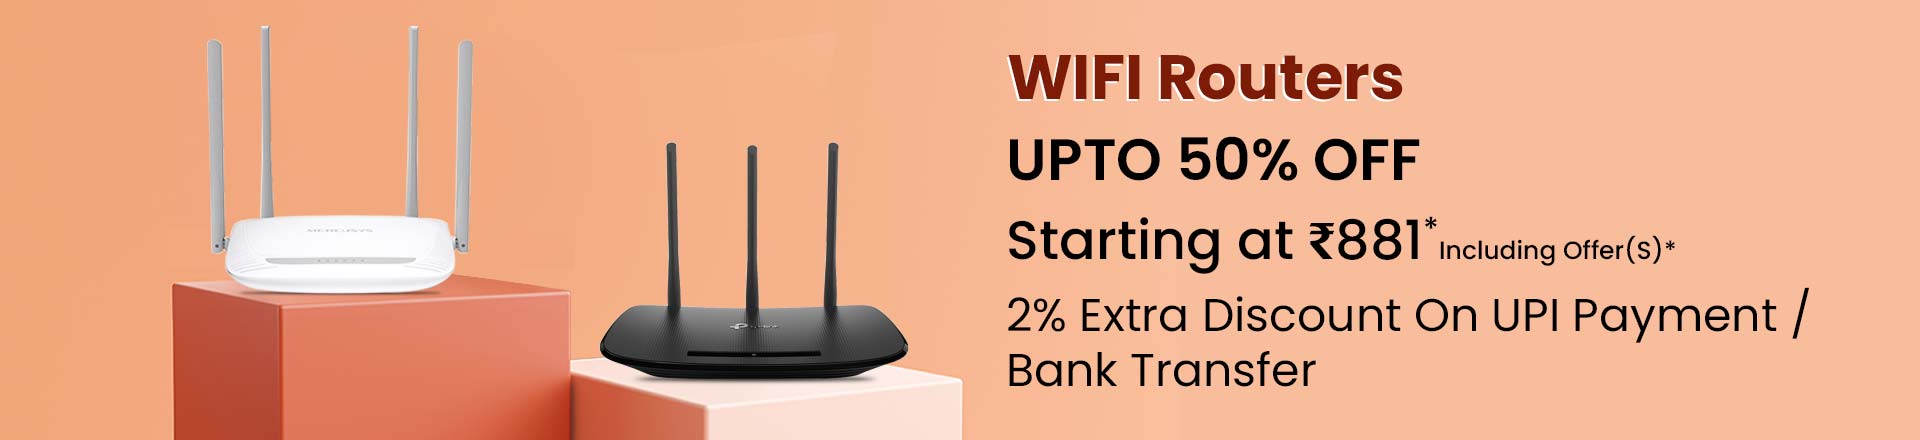 Wifi routers banner category page